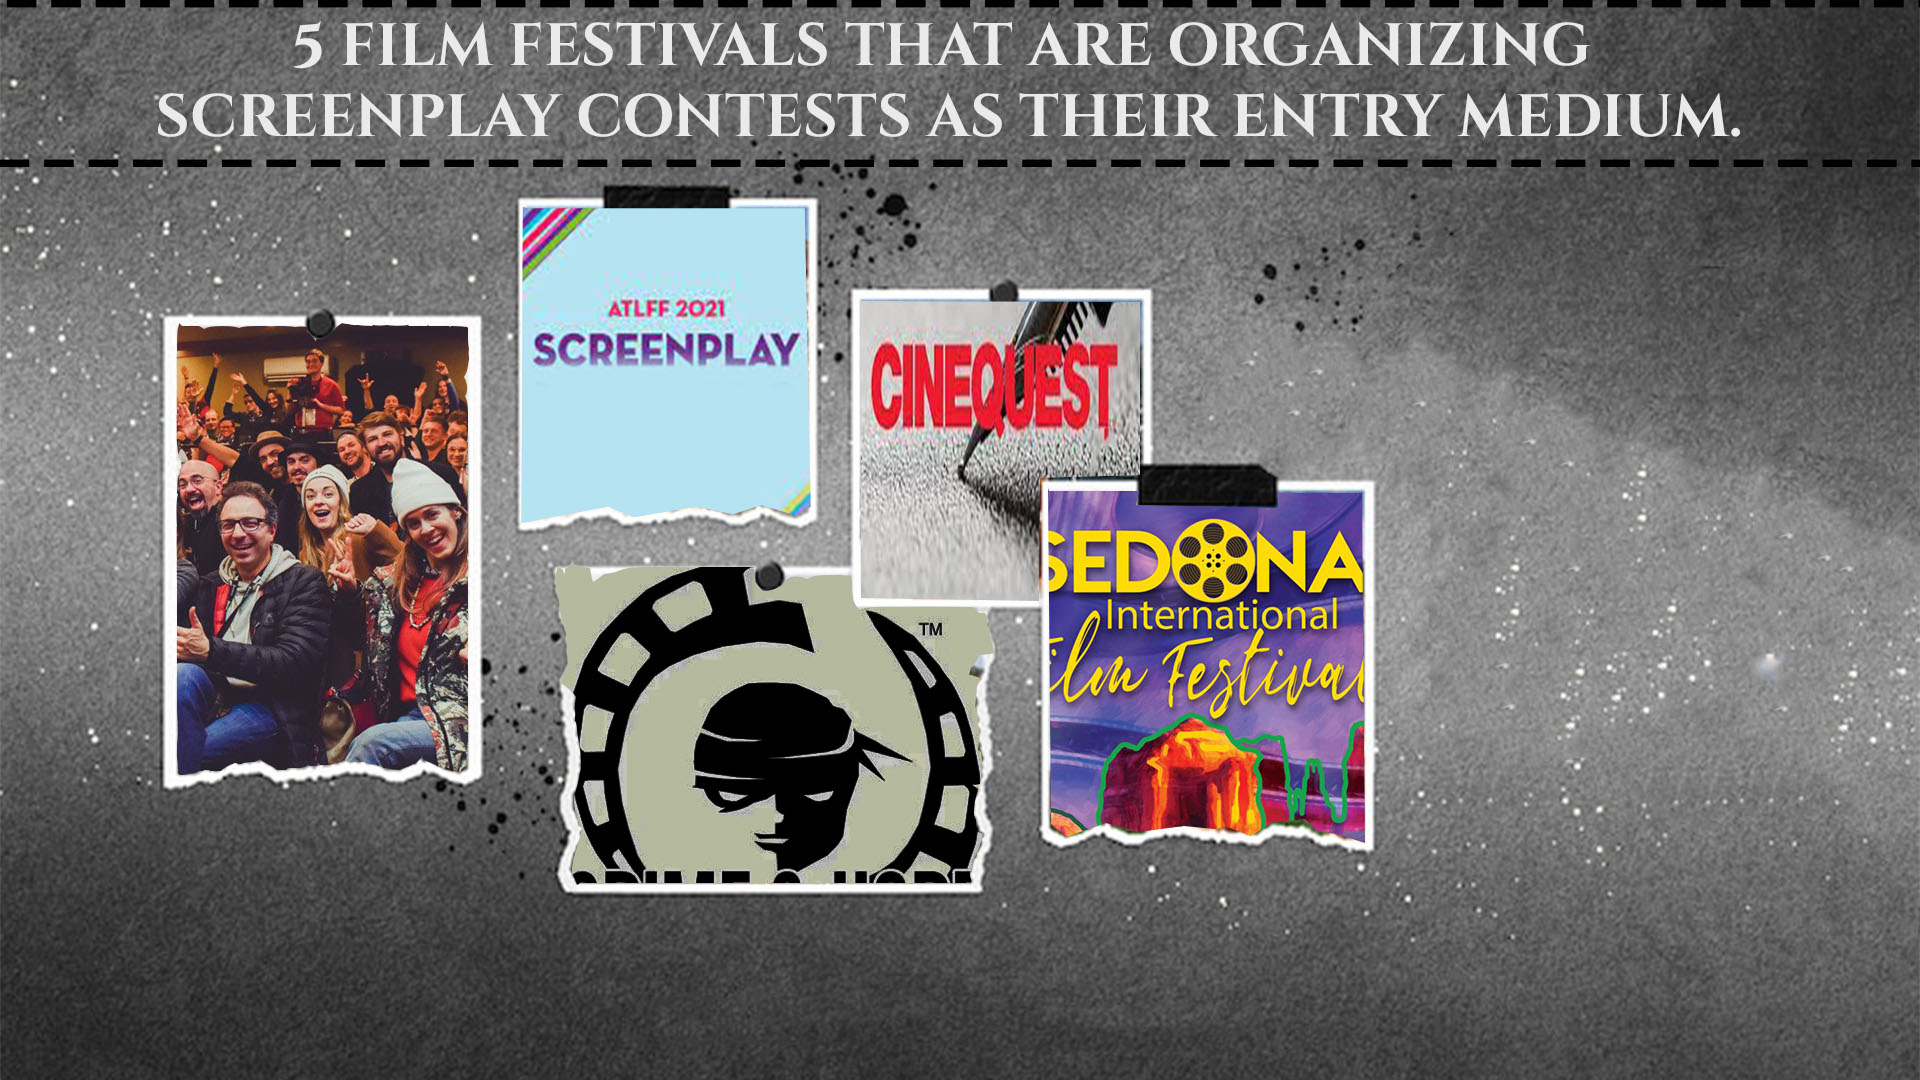 5 Film Festivals that are organizing screenplay contest as their entry medium.